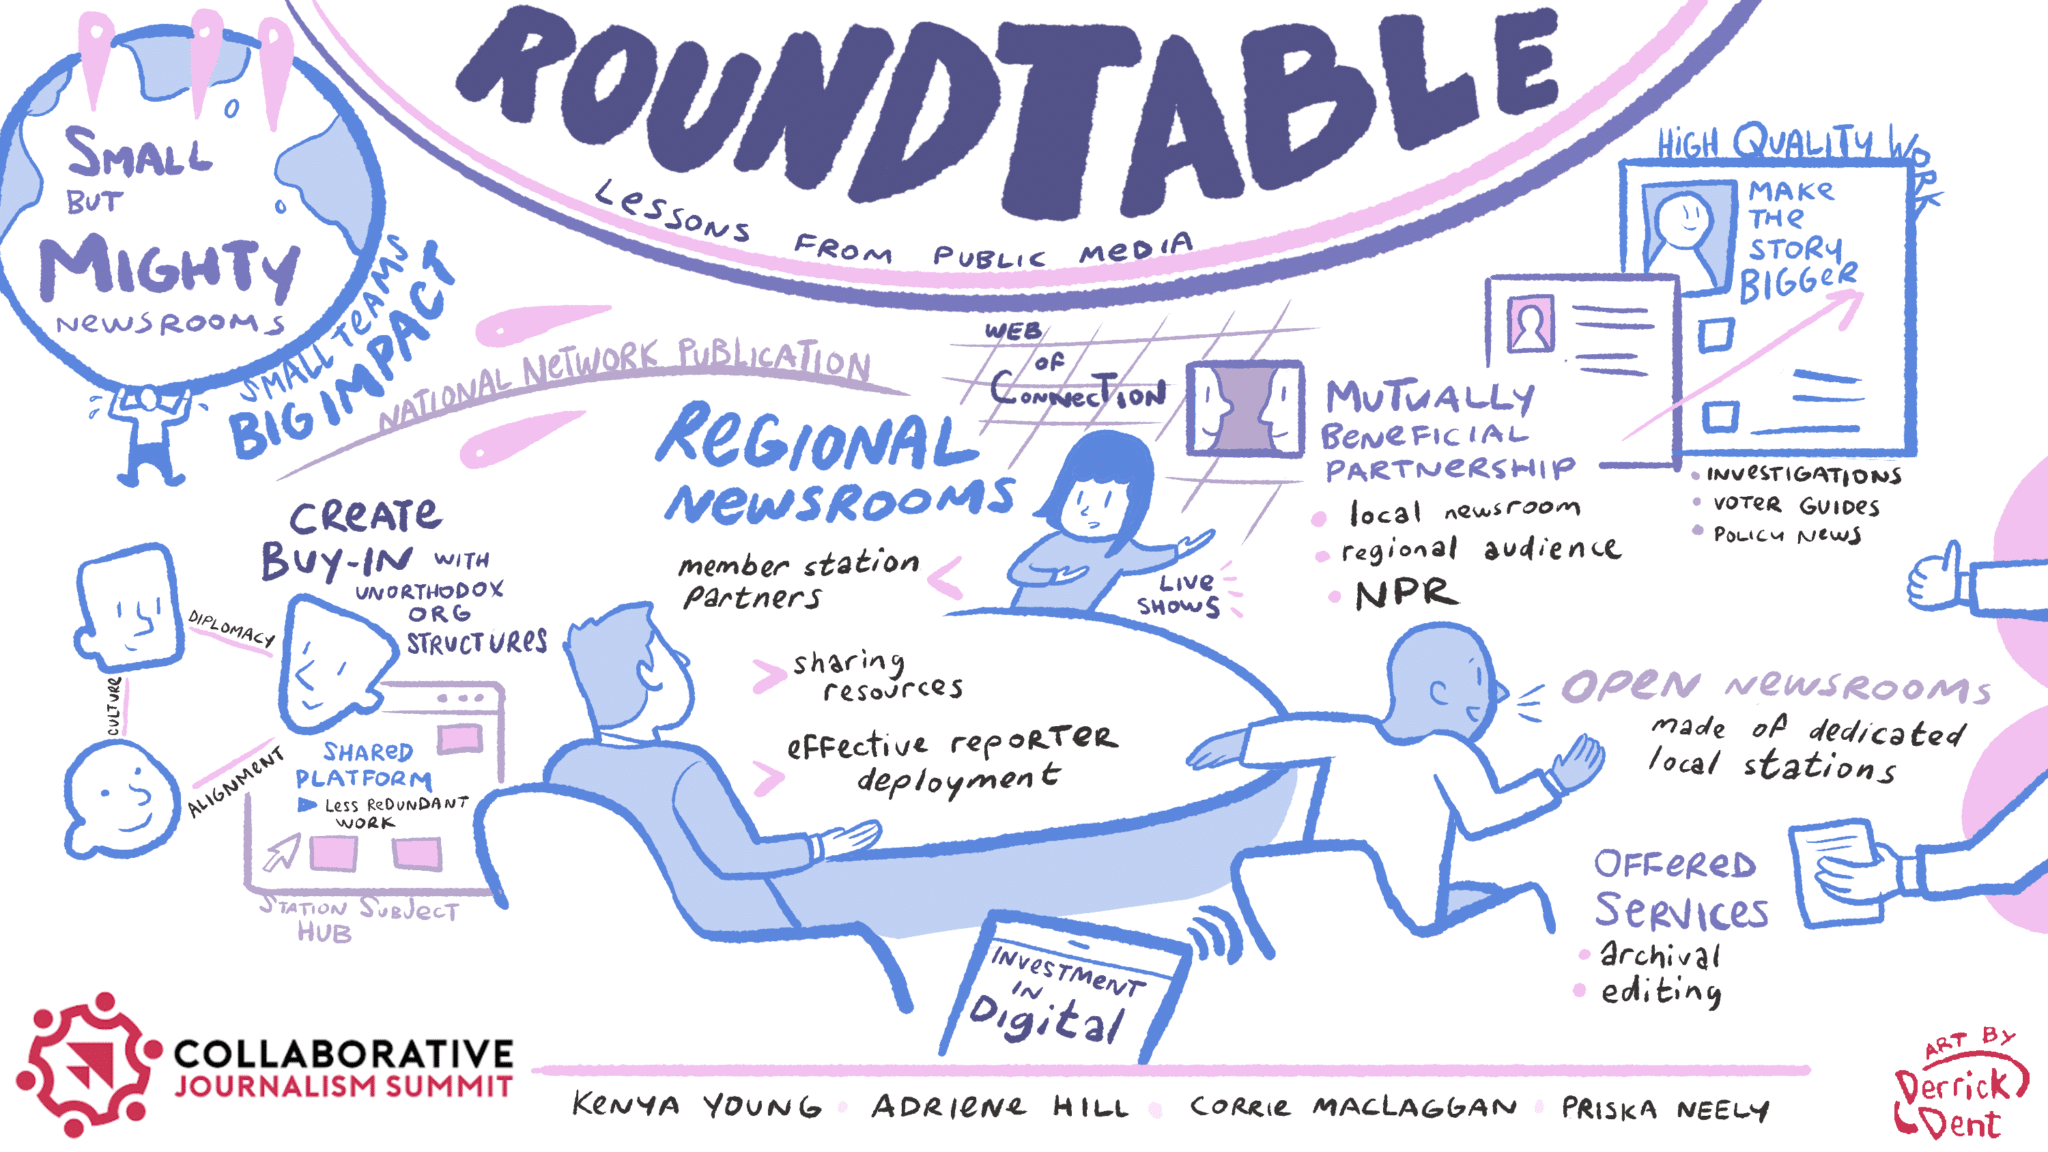 A graphic illustration from a discussion about collaborative journalism and public media features cartoon drawings of people working together surrounded by relevant words and concepts from the discussion.